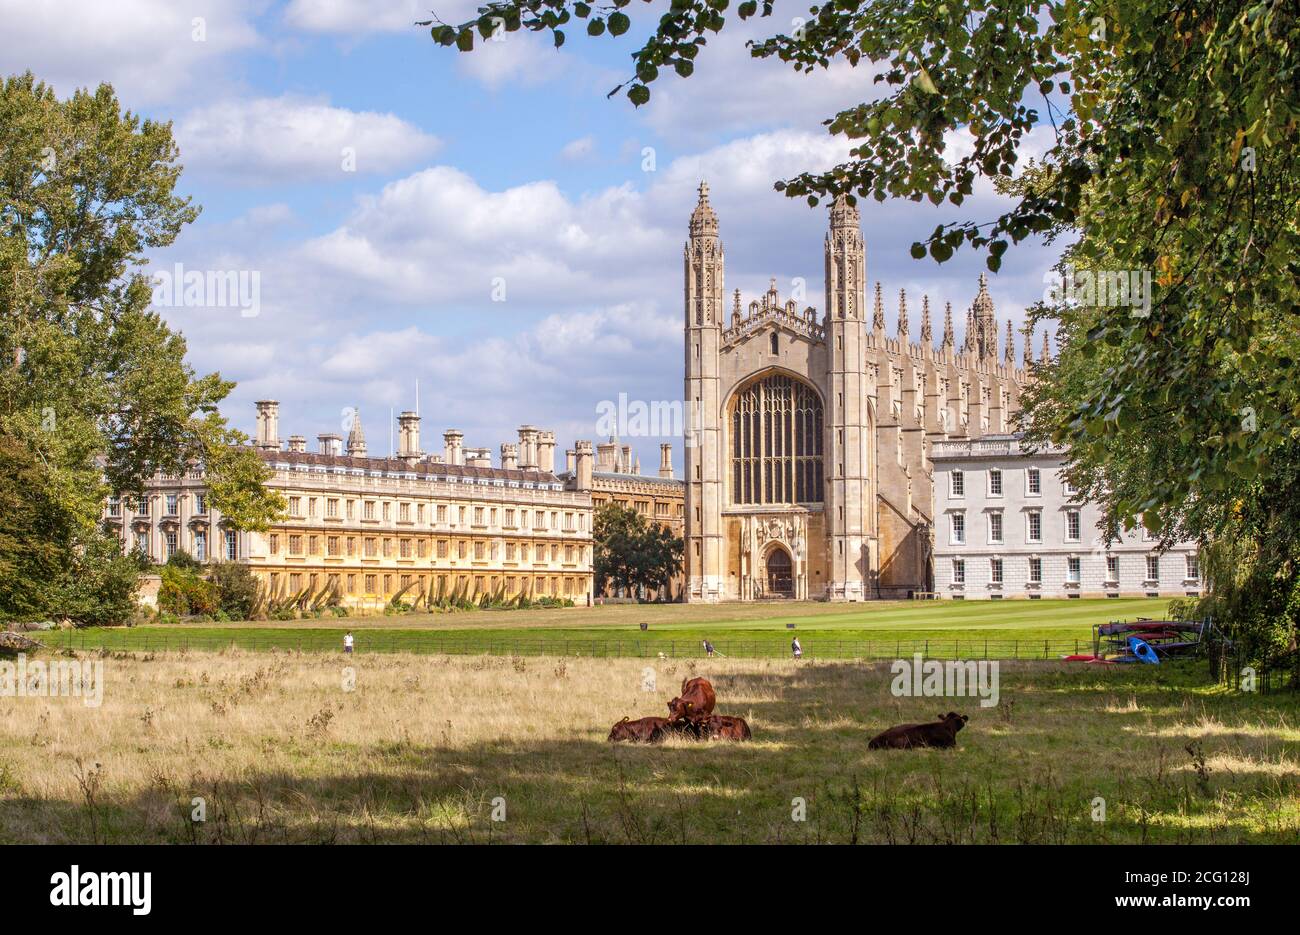 Kings collage Cambridge seen from the backs over the meadows with cows grazing and blue sky Stock Photo